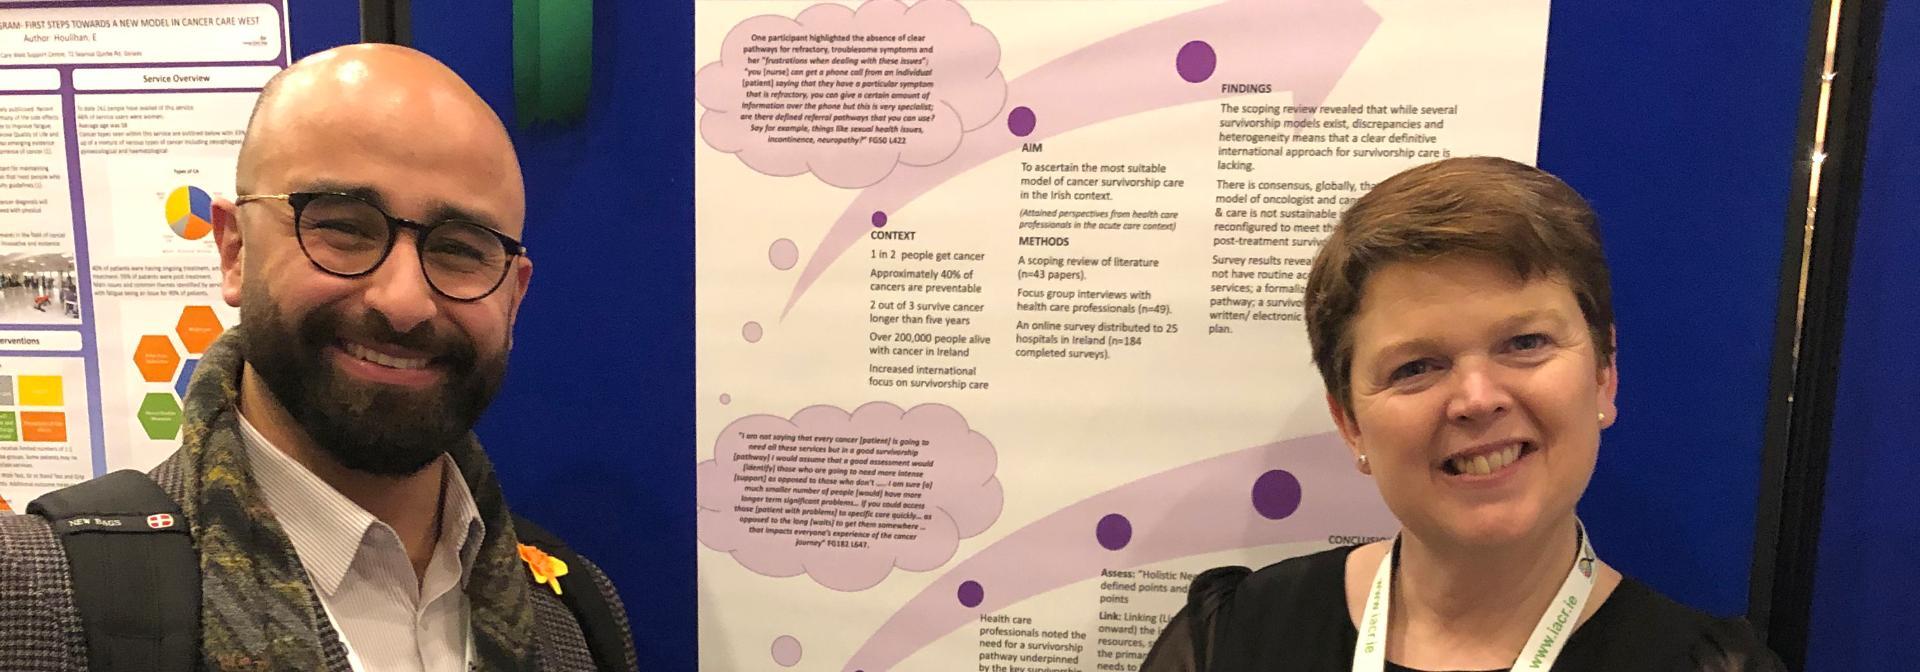 Dr Mohamad Saab and Professor Josephine Hegarty received an award for poster was titled: Model of cancer survivorship care: research to inform the Irish context.